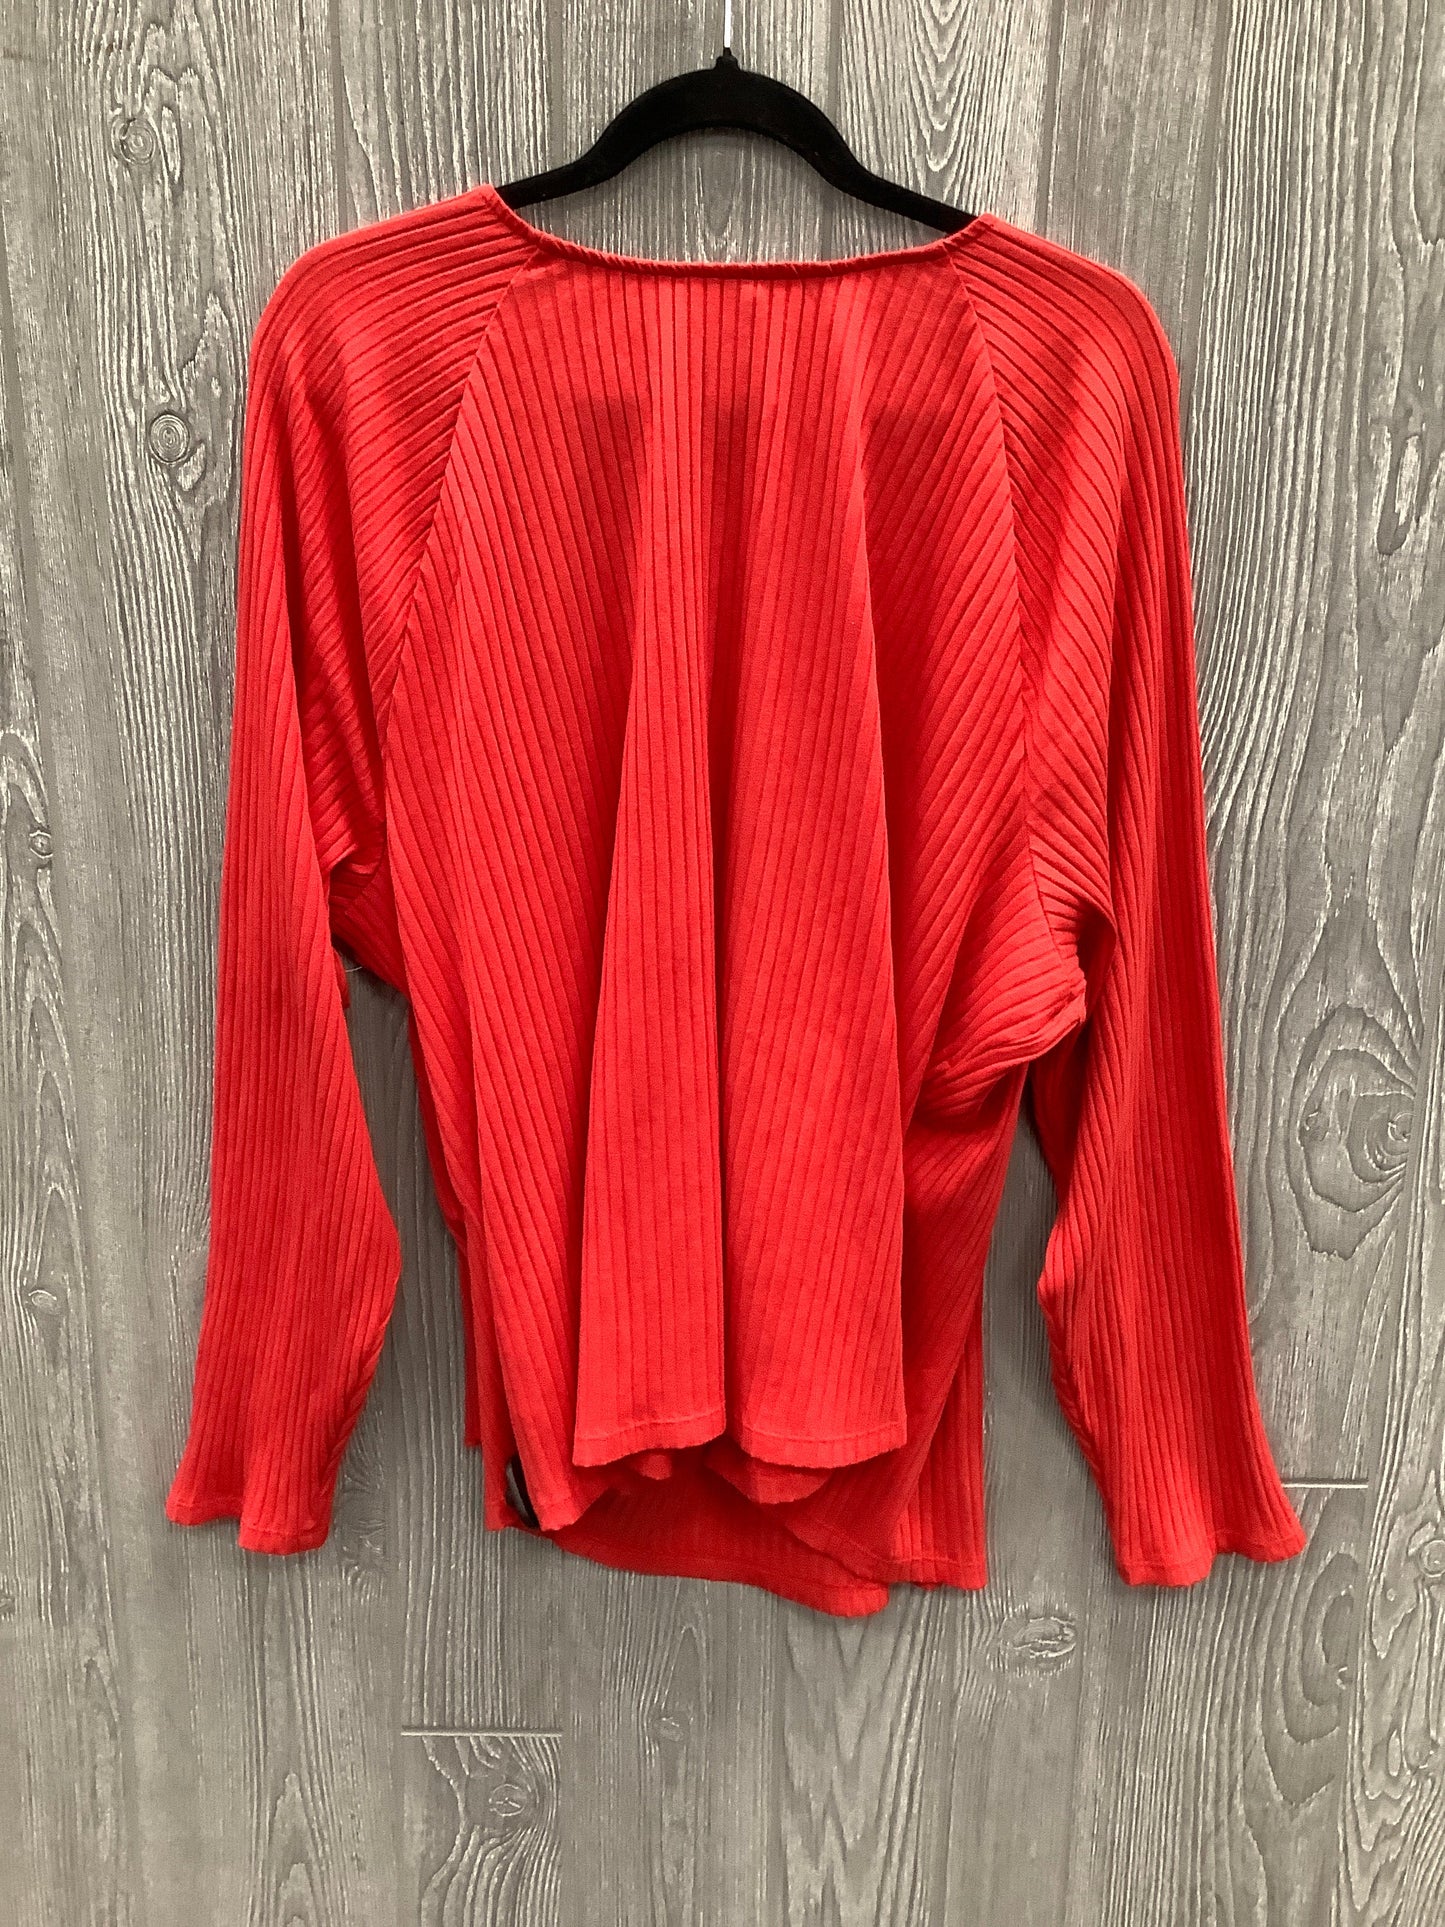 Top Long Sleeve By Universal Thread  Size: 4x